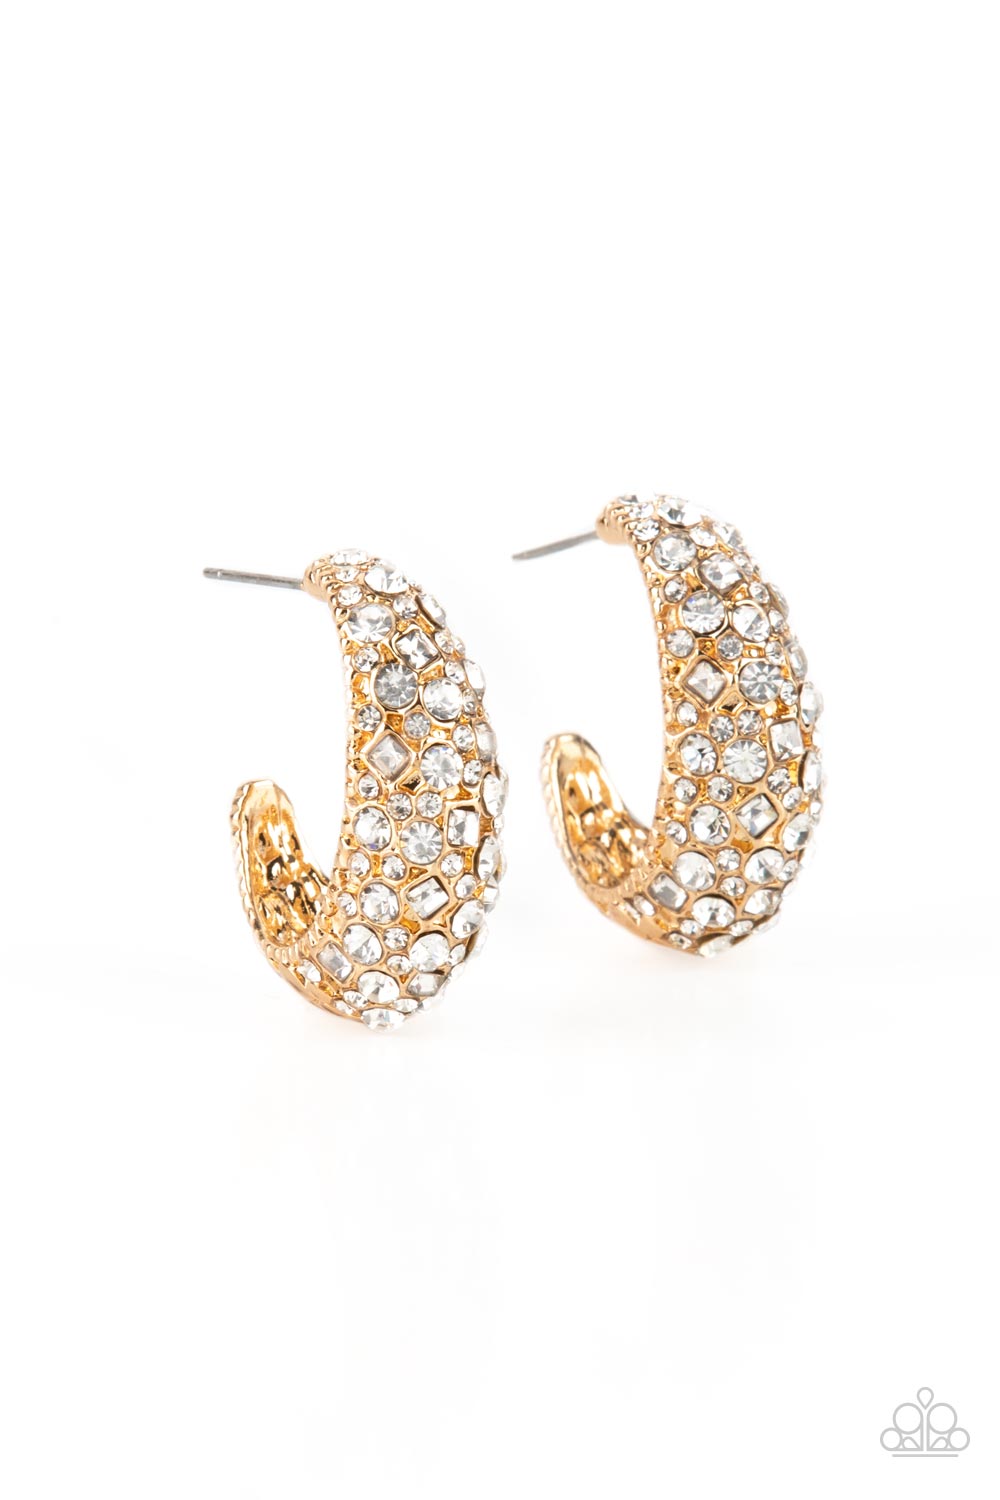 Featuring a beveled surface, a thick hammered gold hoop is haphazardly encrusted in round and square white rhinestones for a glamorously glittery finish. Earring attaches to a standard post fitting. Hoop measures approximately 3/4" in diameter.  Sold as one pair of hoop earrings.